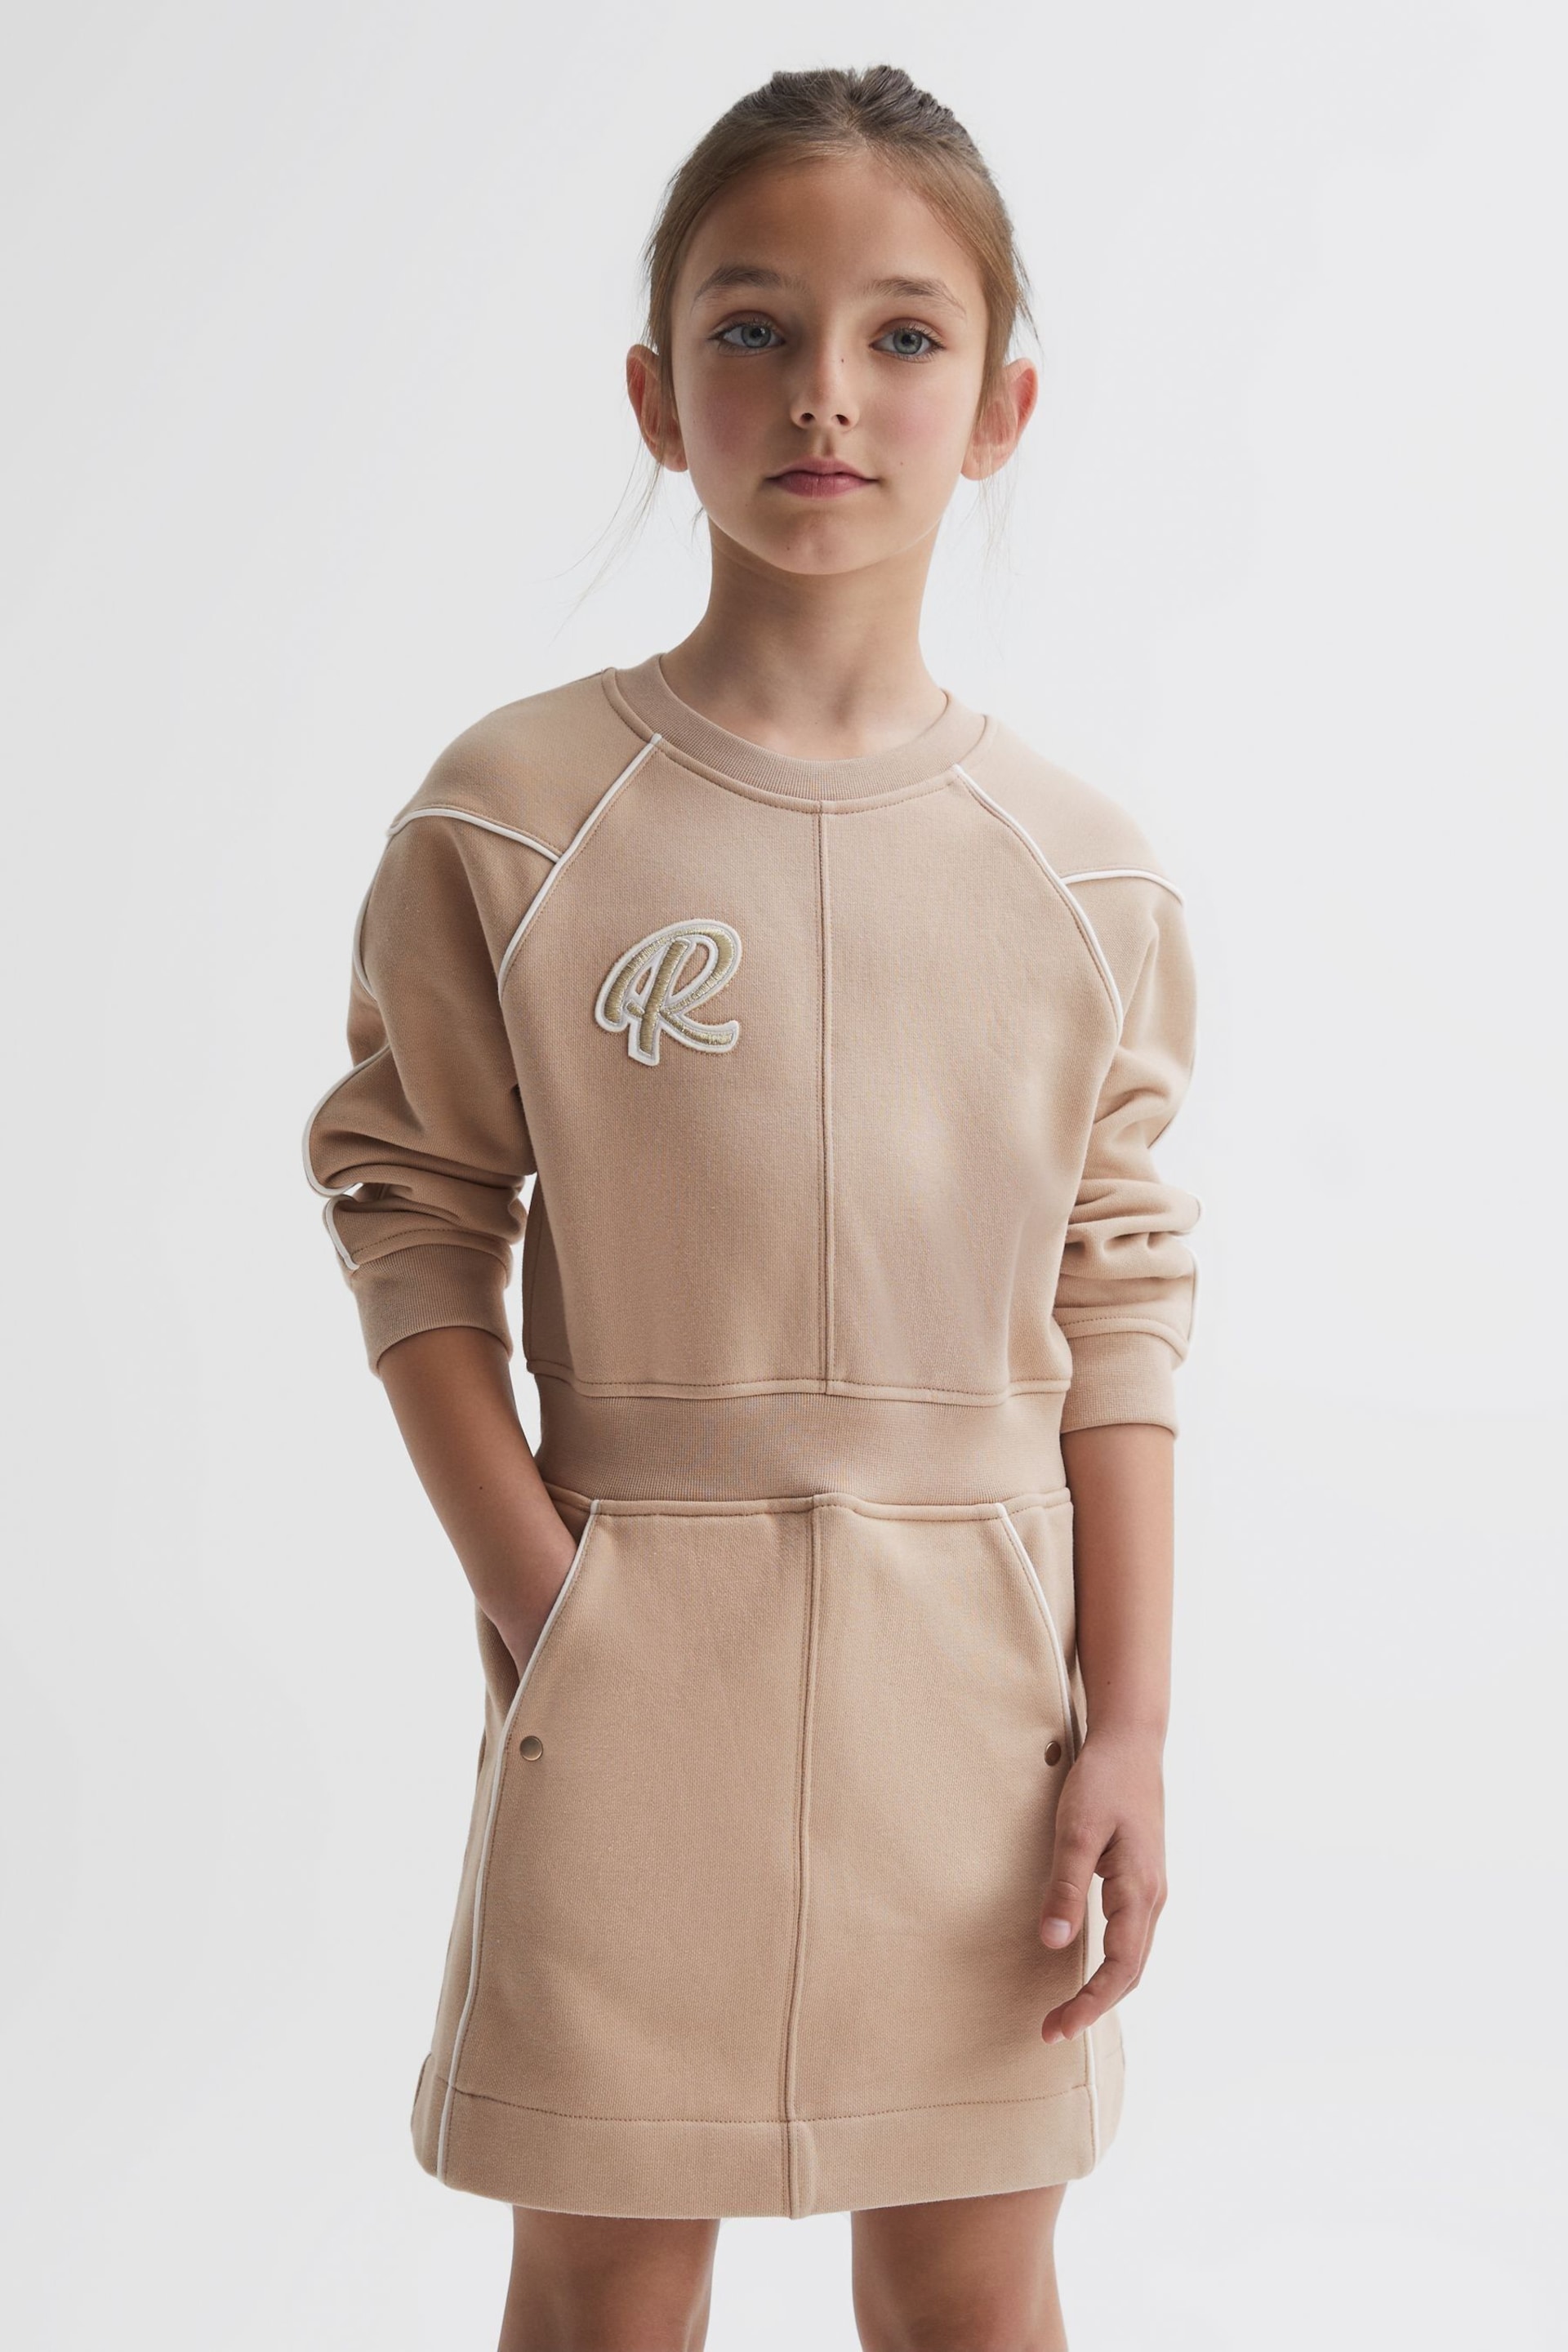 Reiss Camel Jona Junior Embroidered Jersey Dress - Image 1 of 5